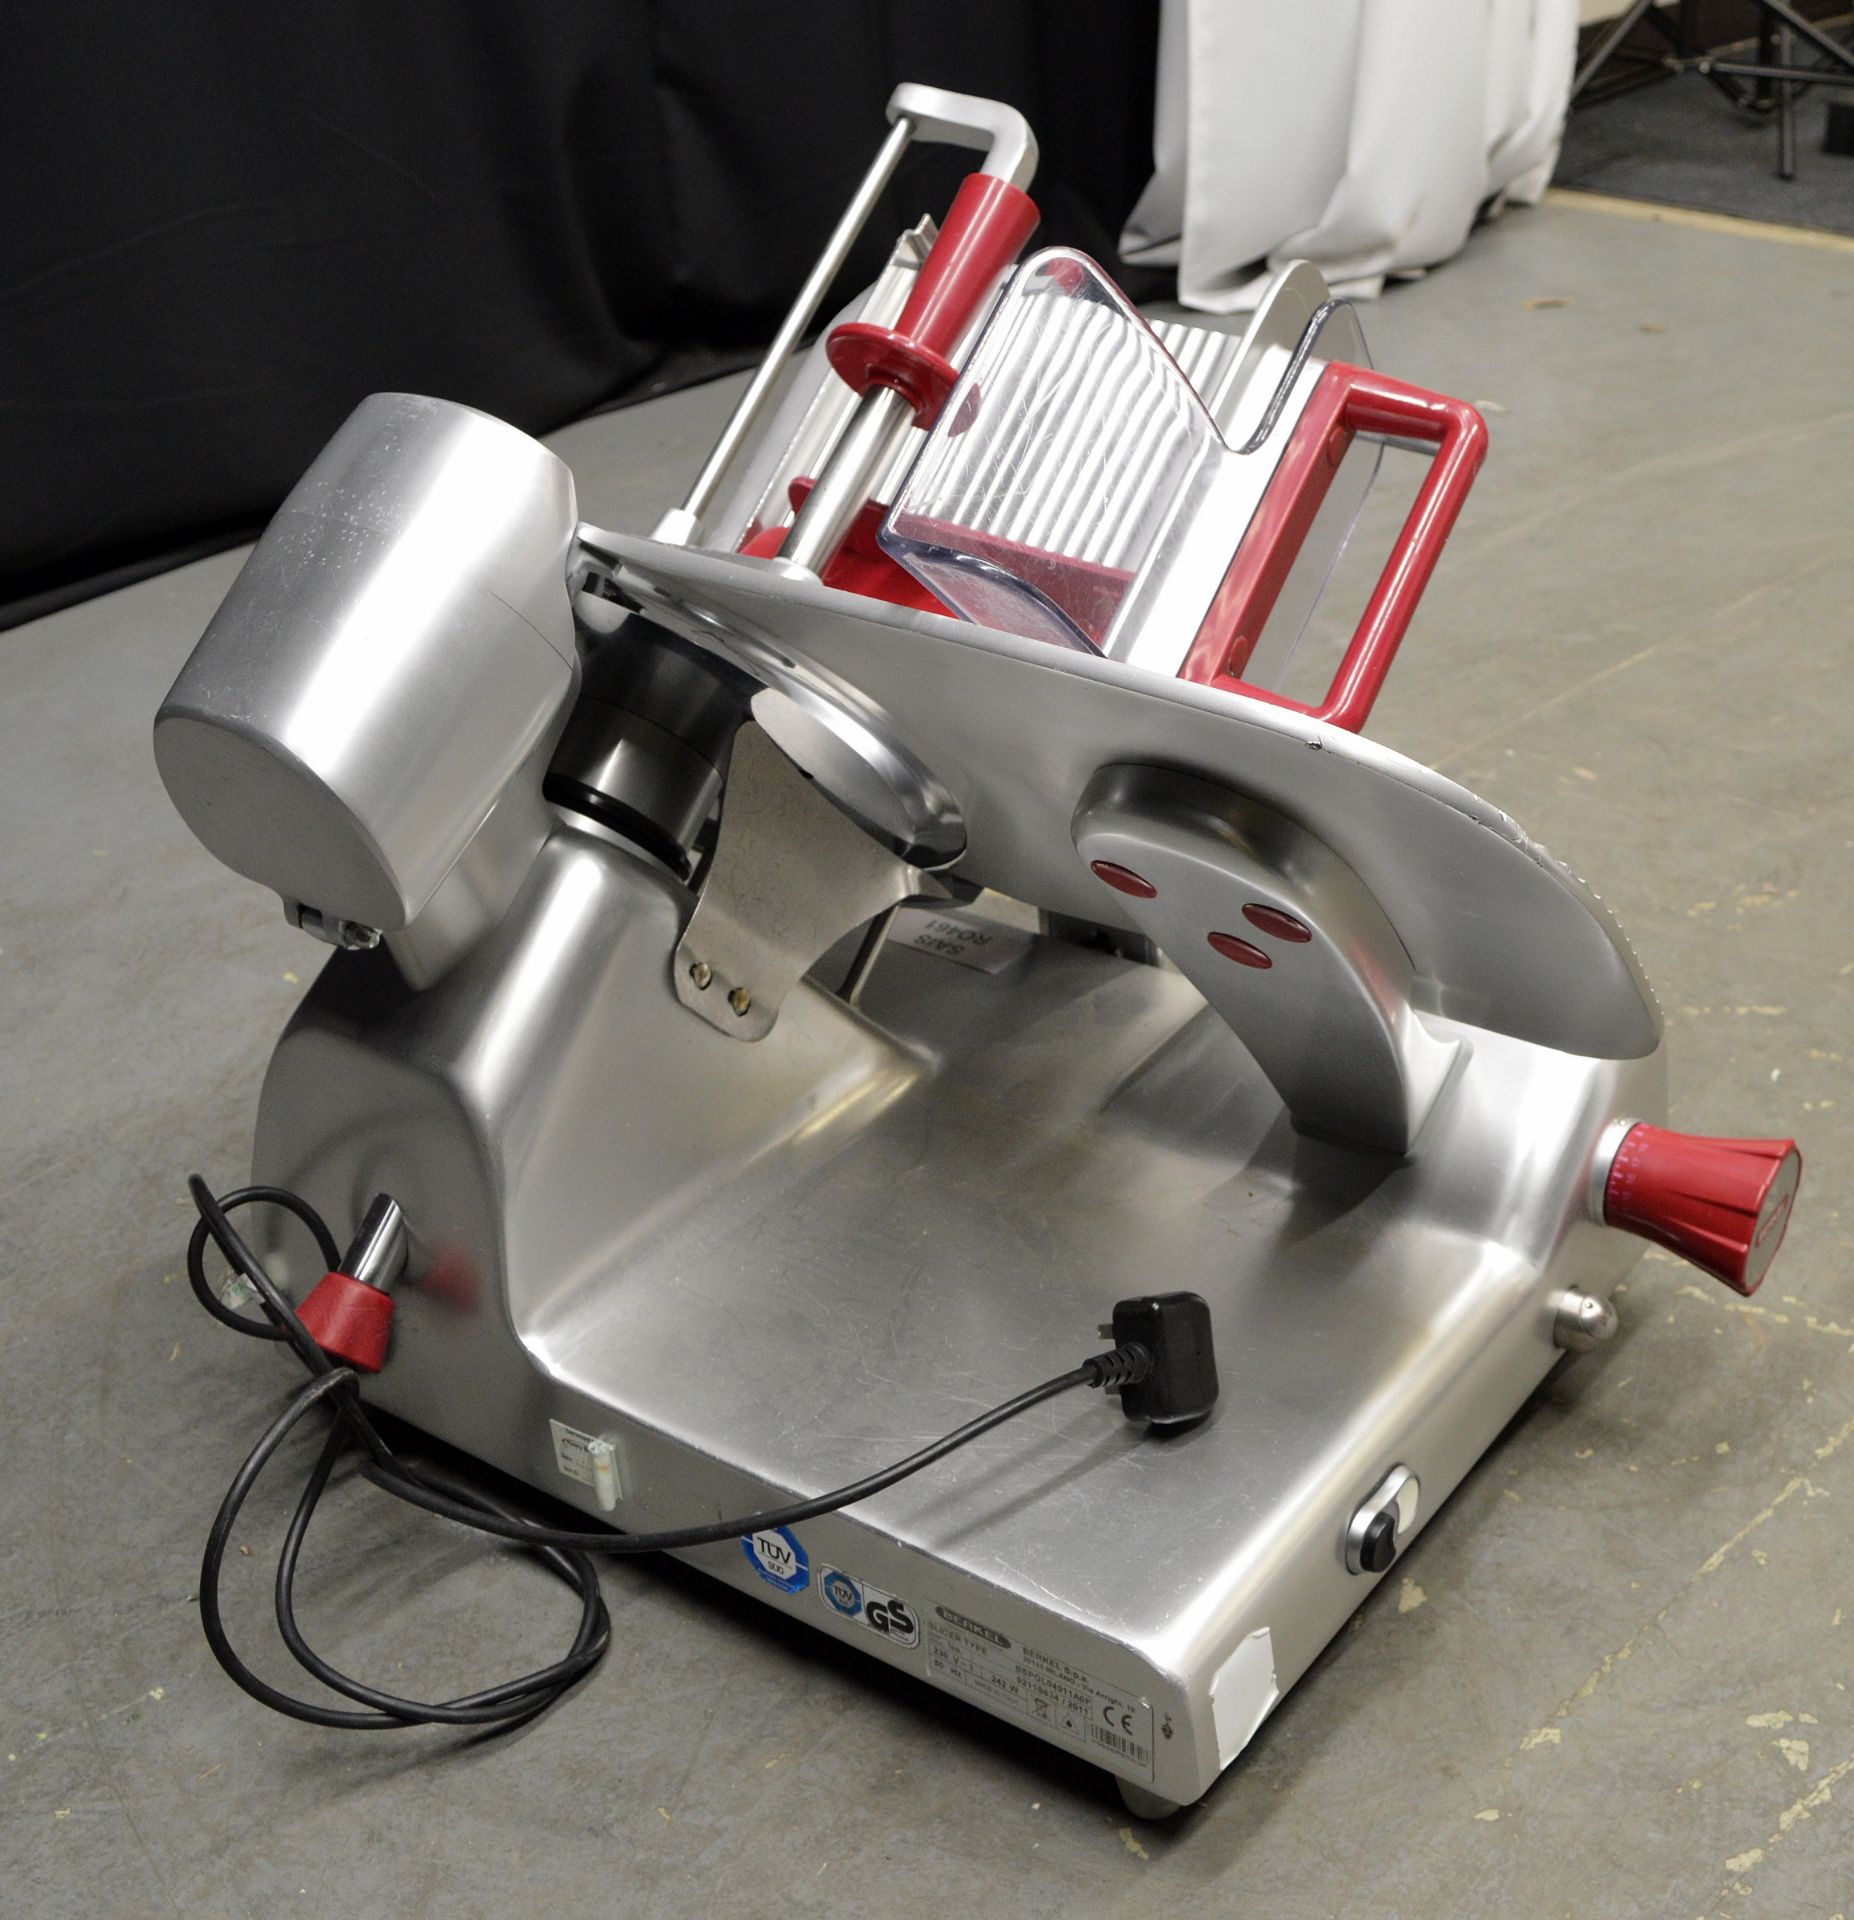 Berkel BSPGL04011A0F 12" Commercial Cooked Meat / Bacon Slicer, single phase electric - Image 6 of 8